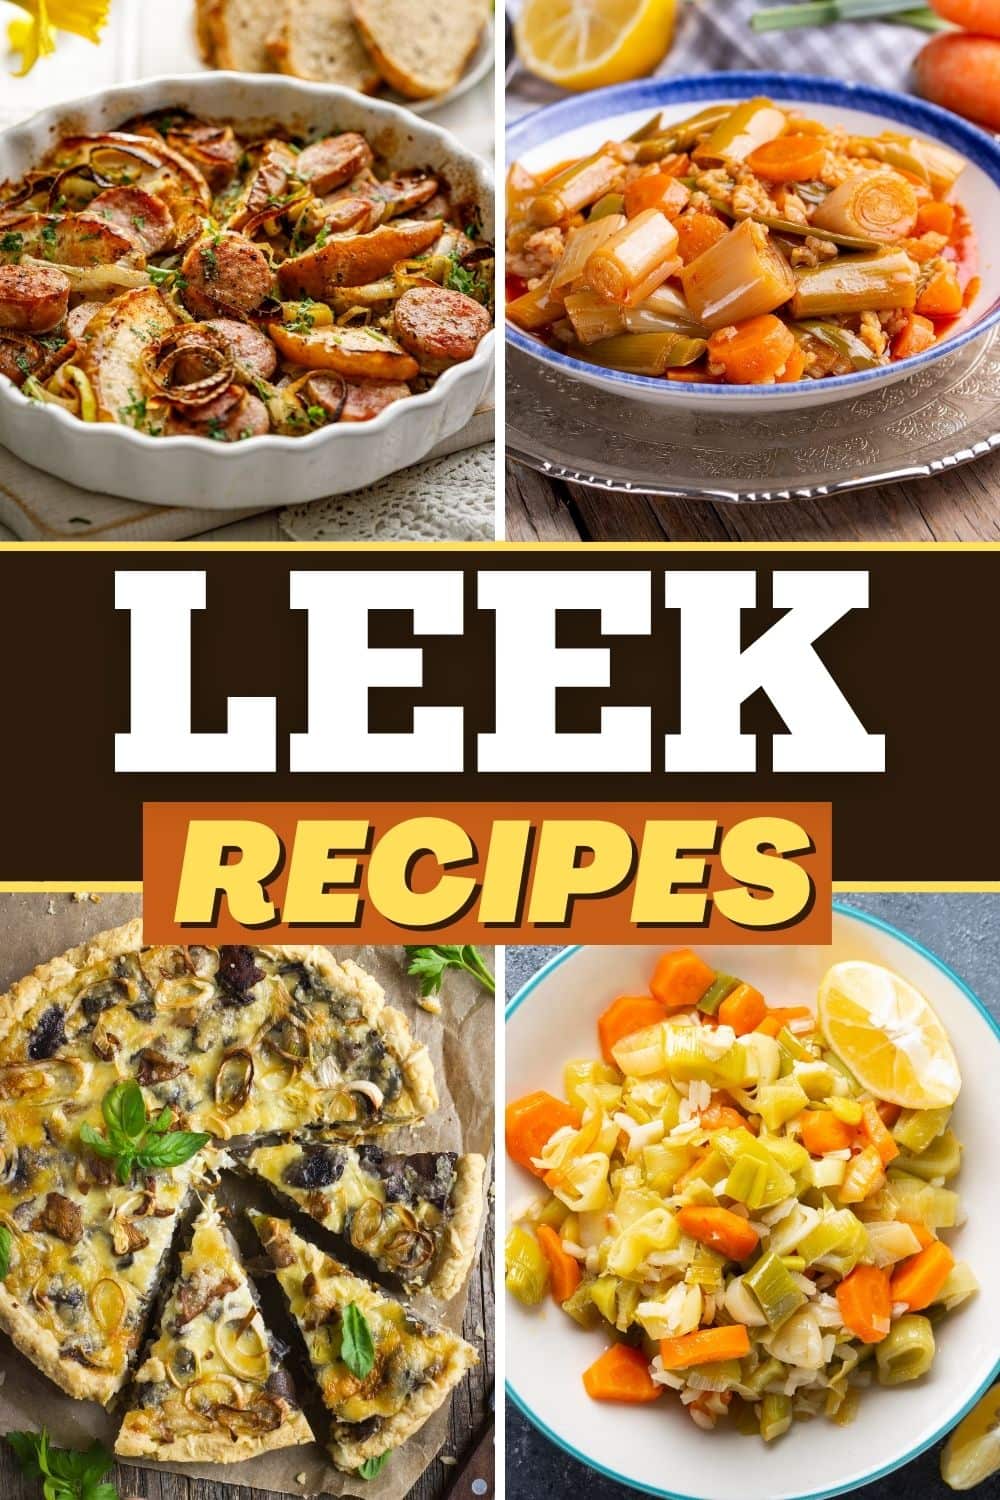 20 Best Leek Recipes the Family Will Love - Insanely Good